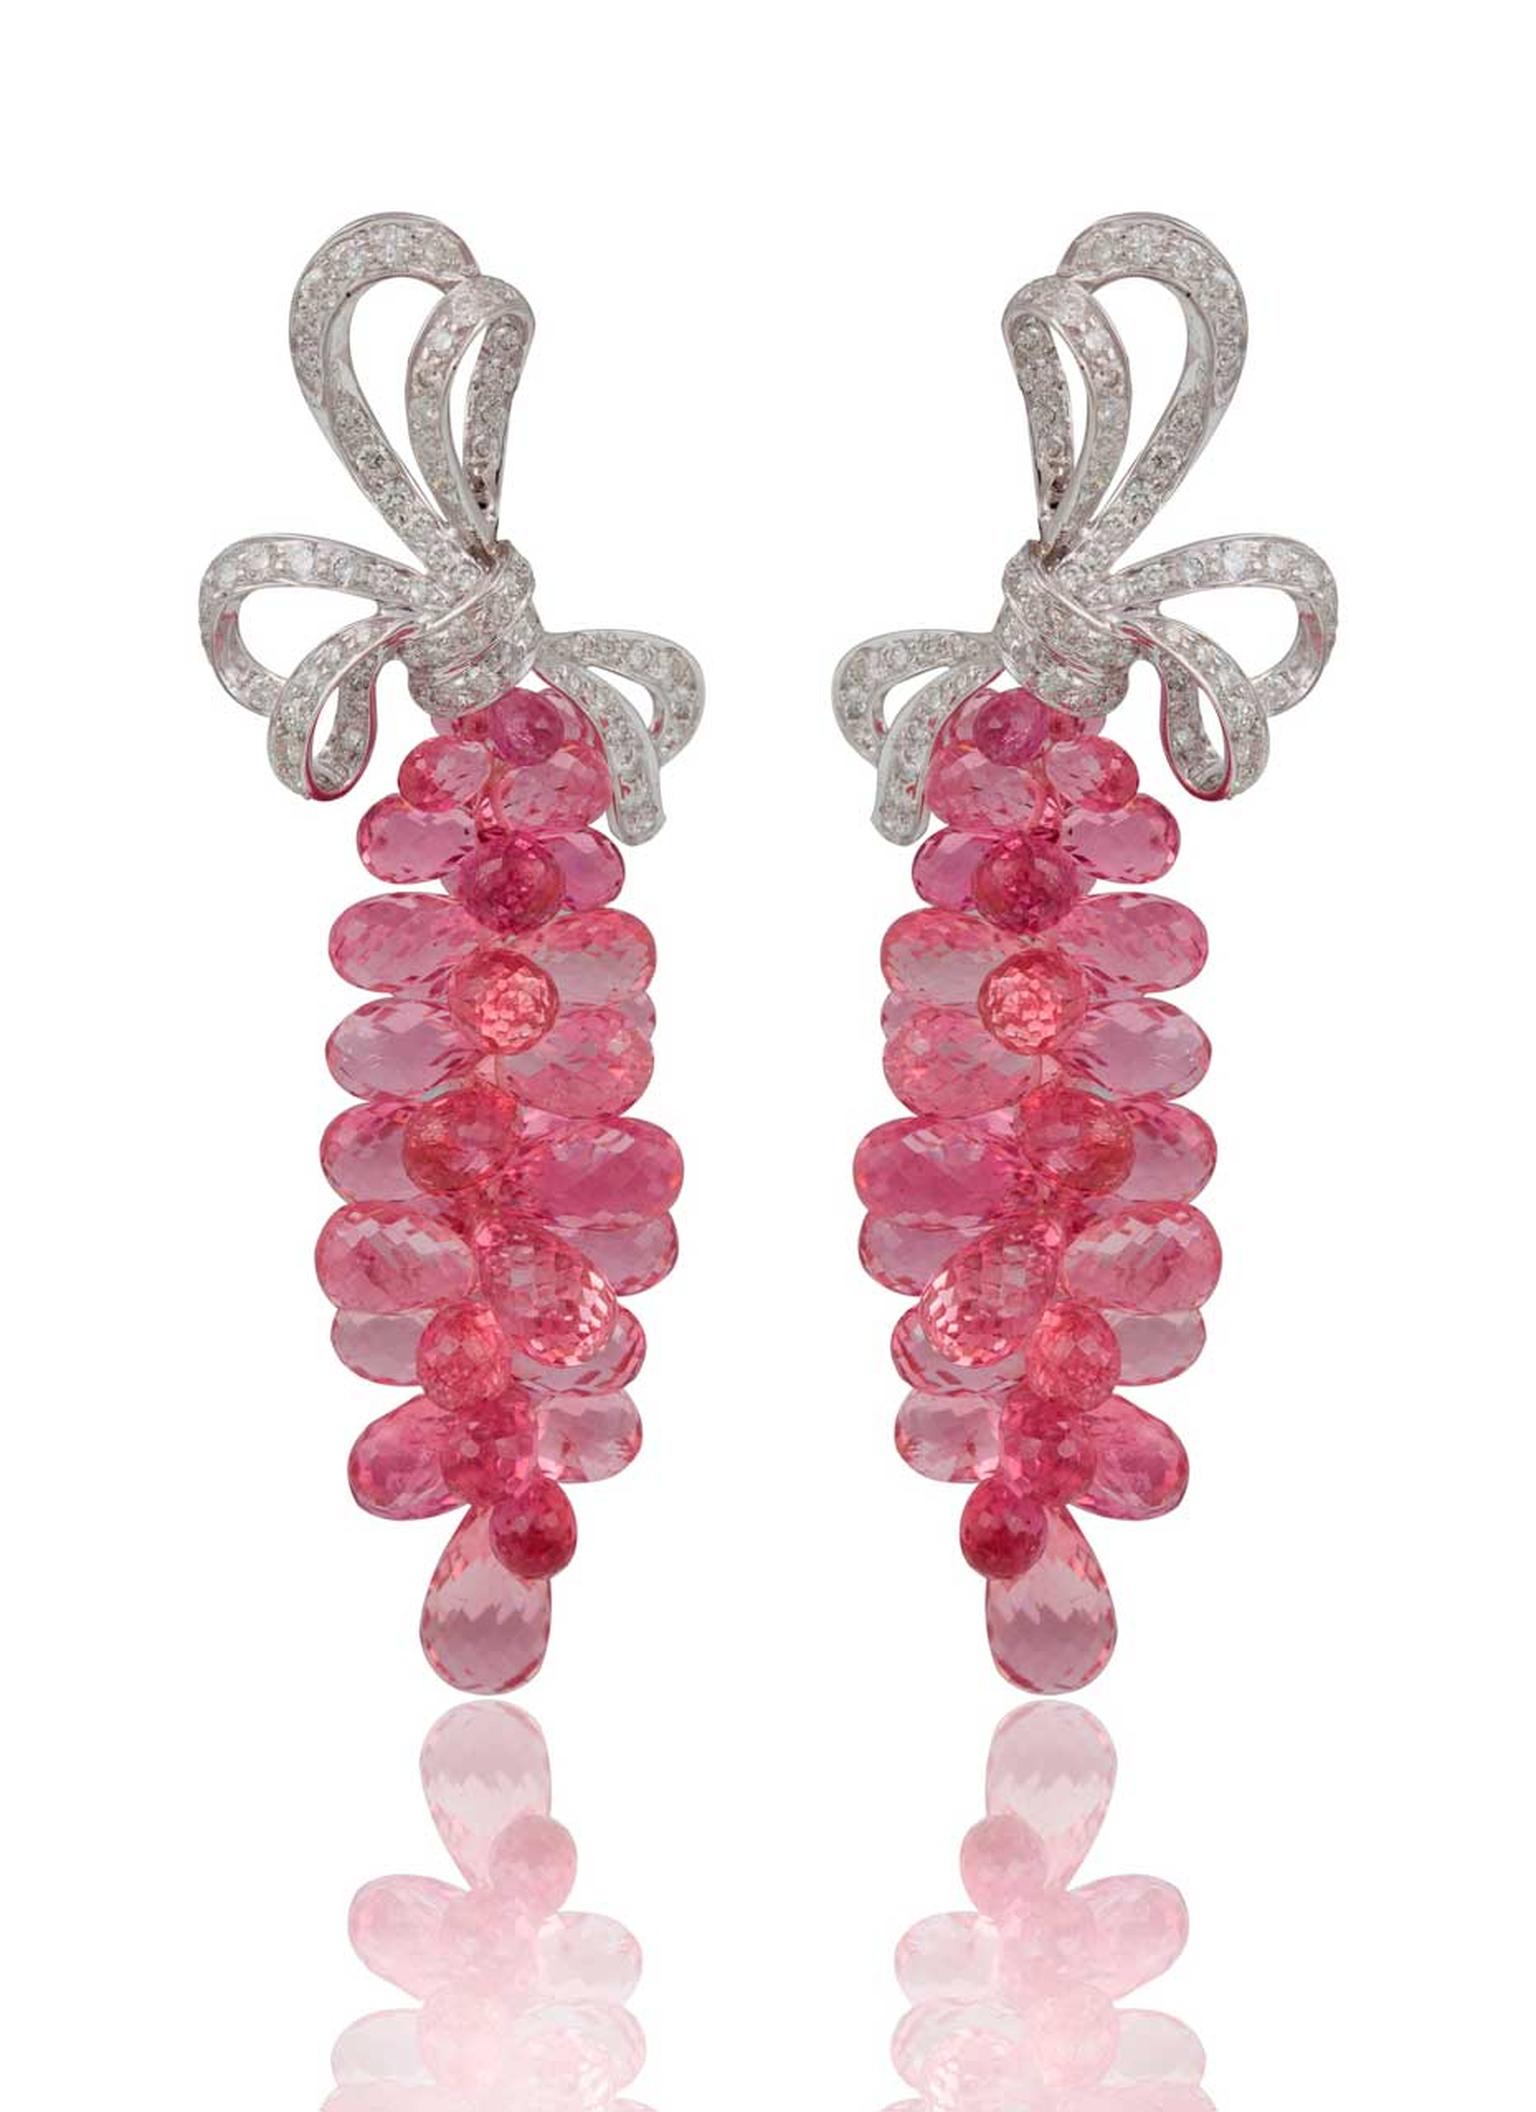 Mirari earrings in white gold with rubellite briolettes and diamonds.